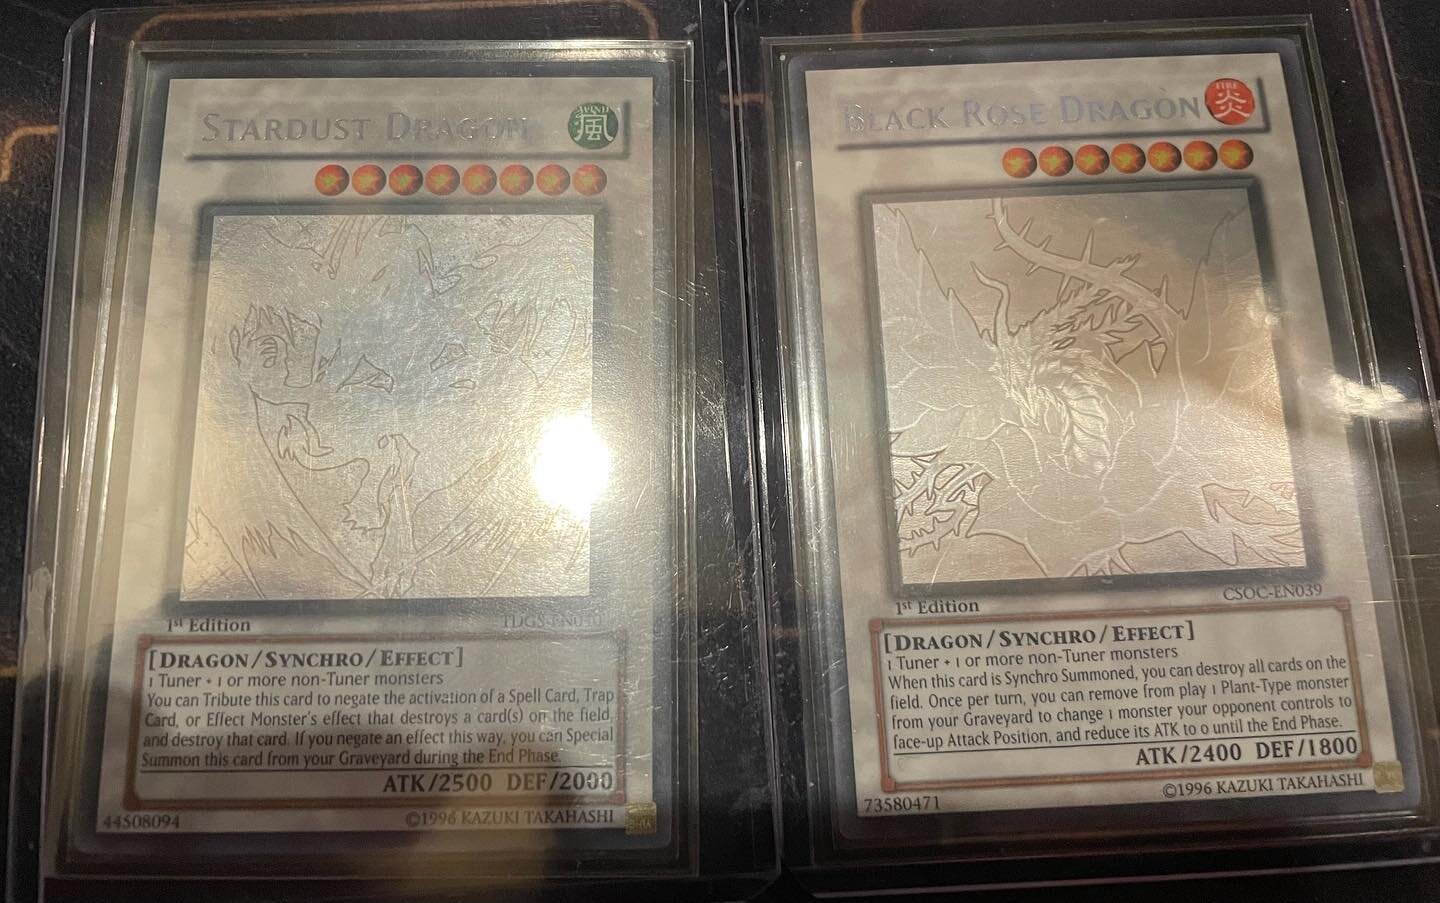 Finally got to own 2 grails from yugioh history - god I&rsquo;m hype